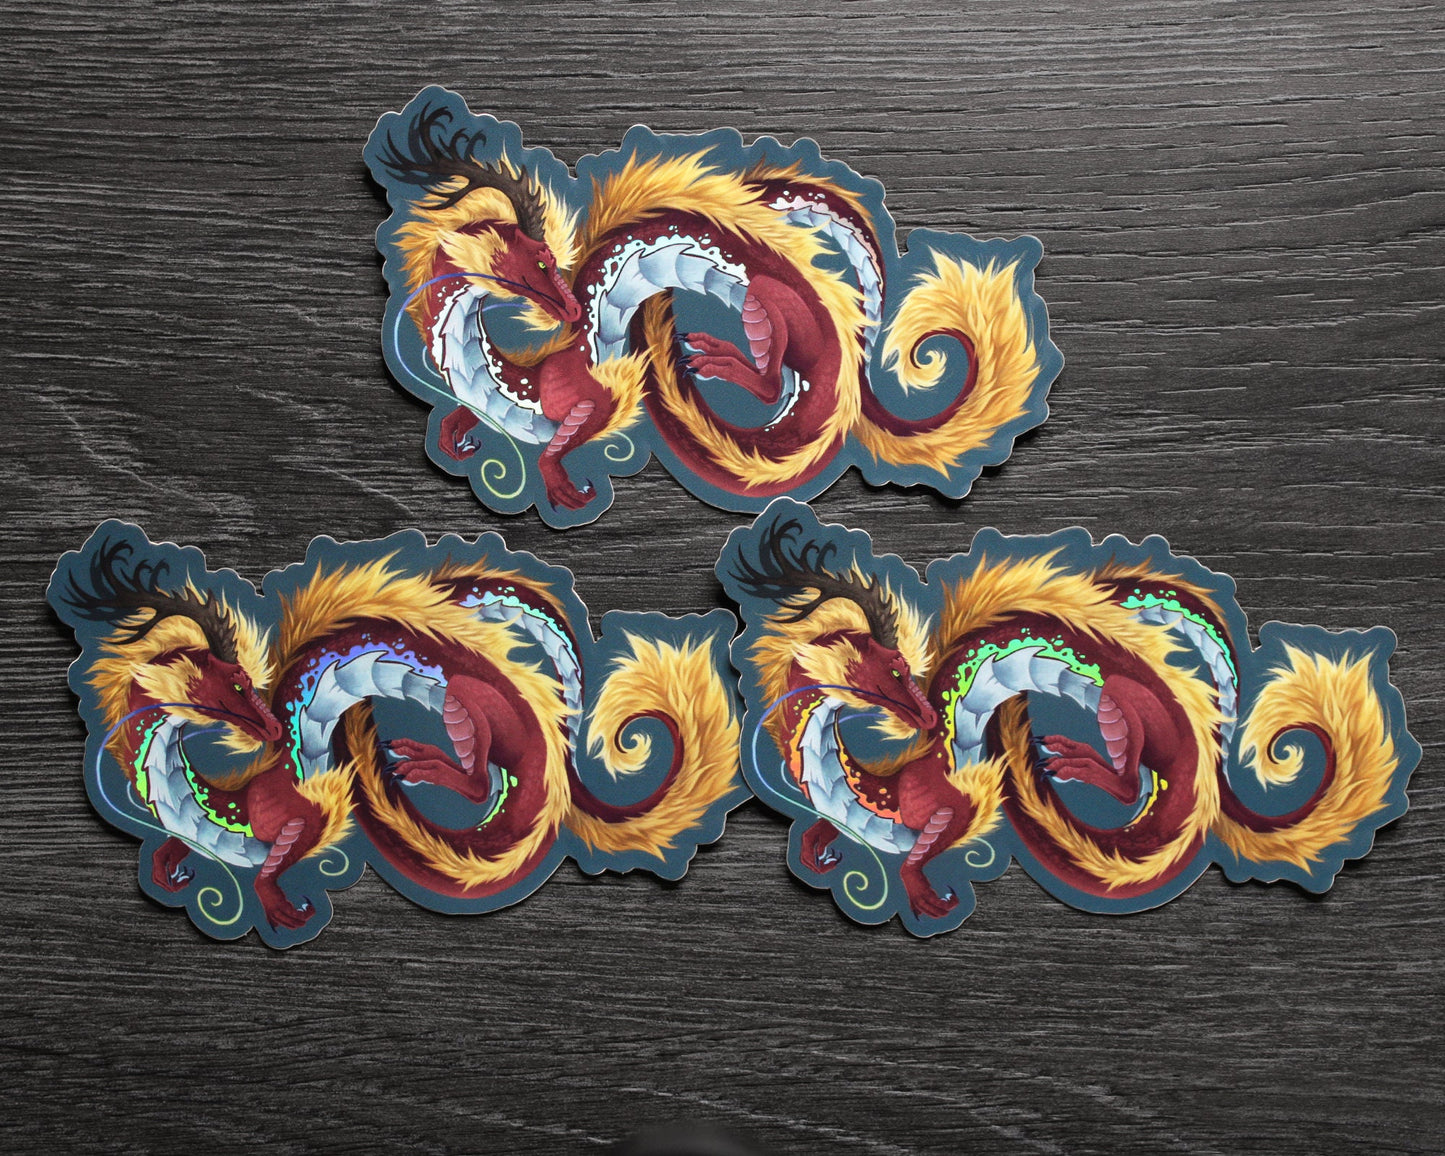 Eastern Dragon - Holographic Sticker